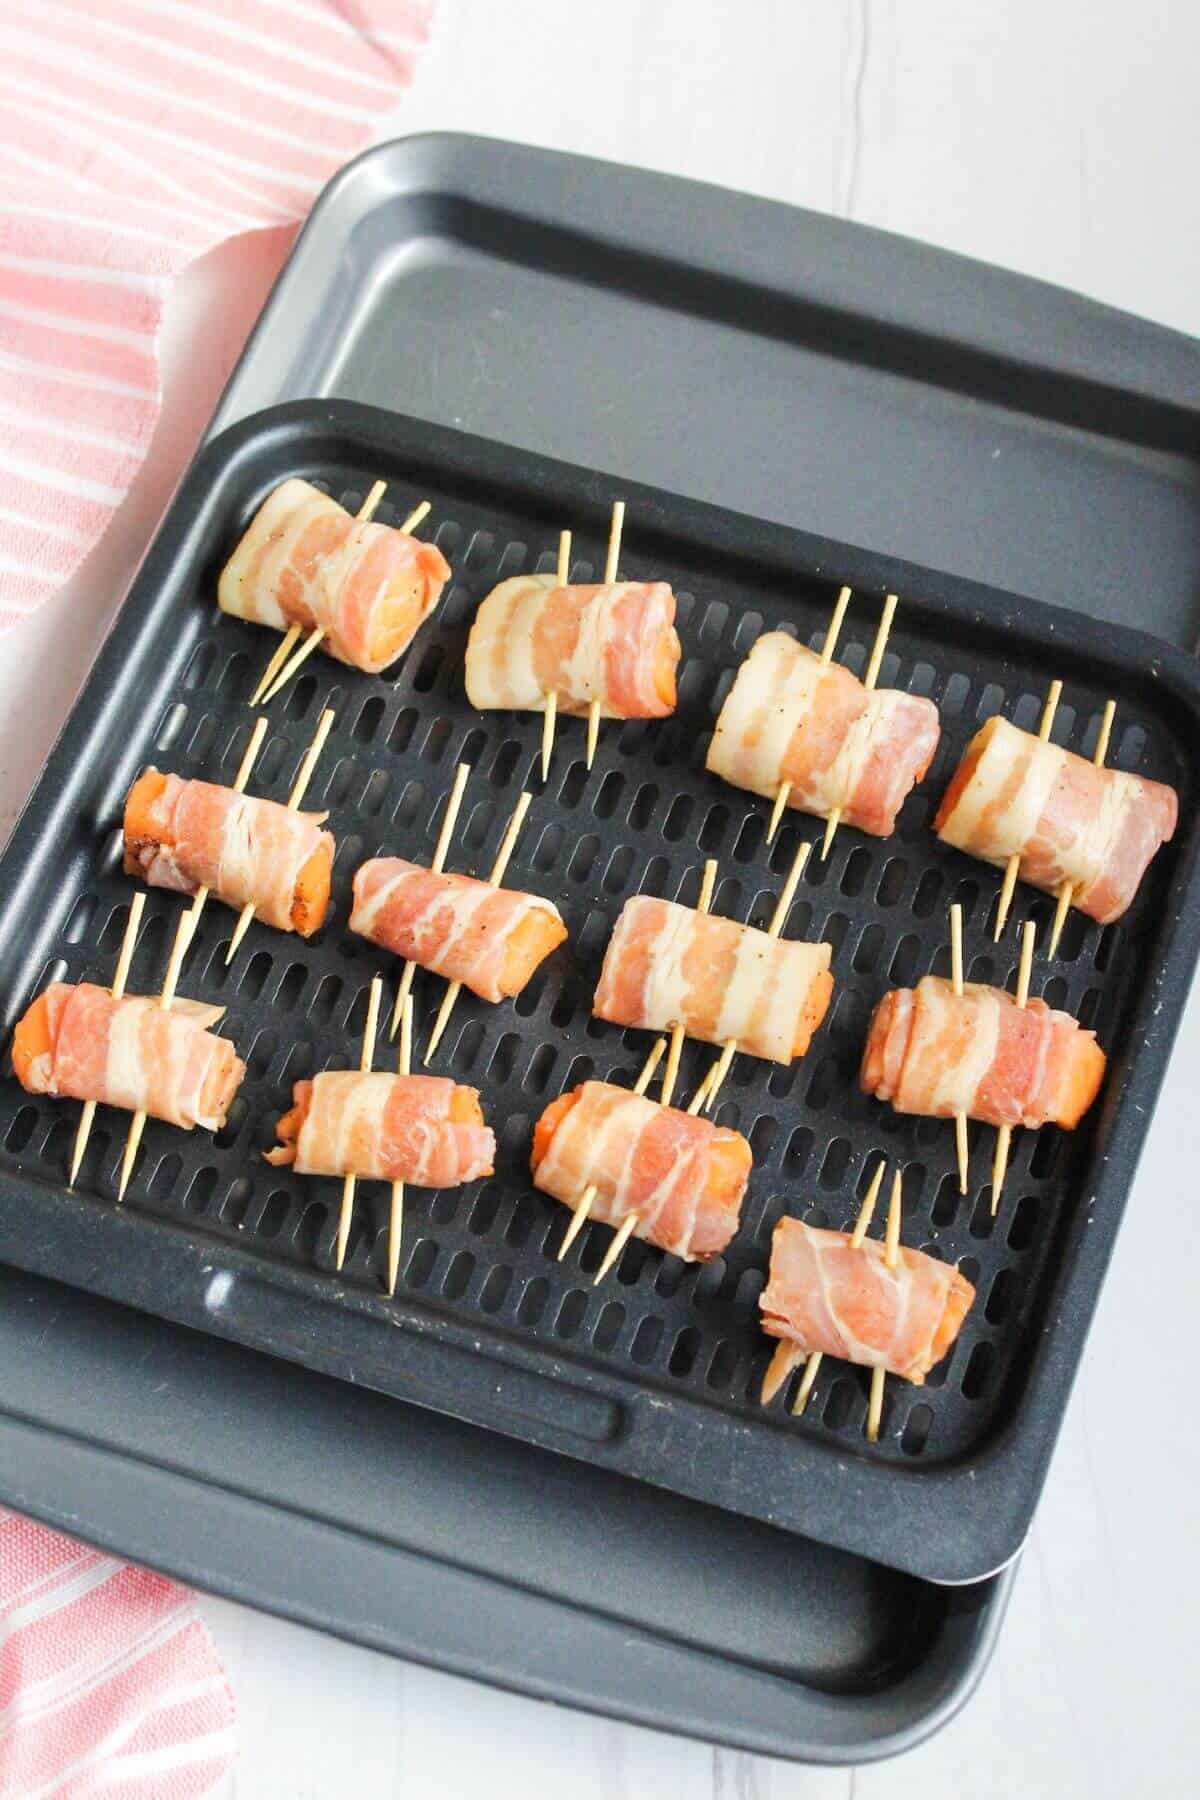 Bacon wrapped salmon bites on toothpicks arranged on an air fryer tray.